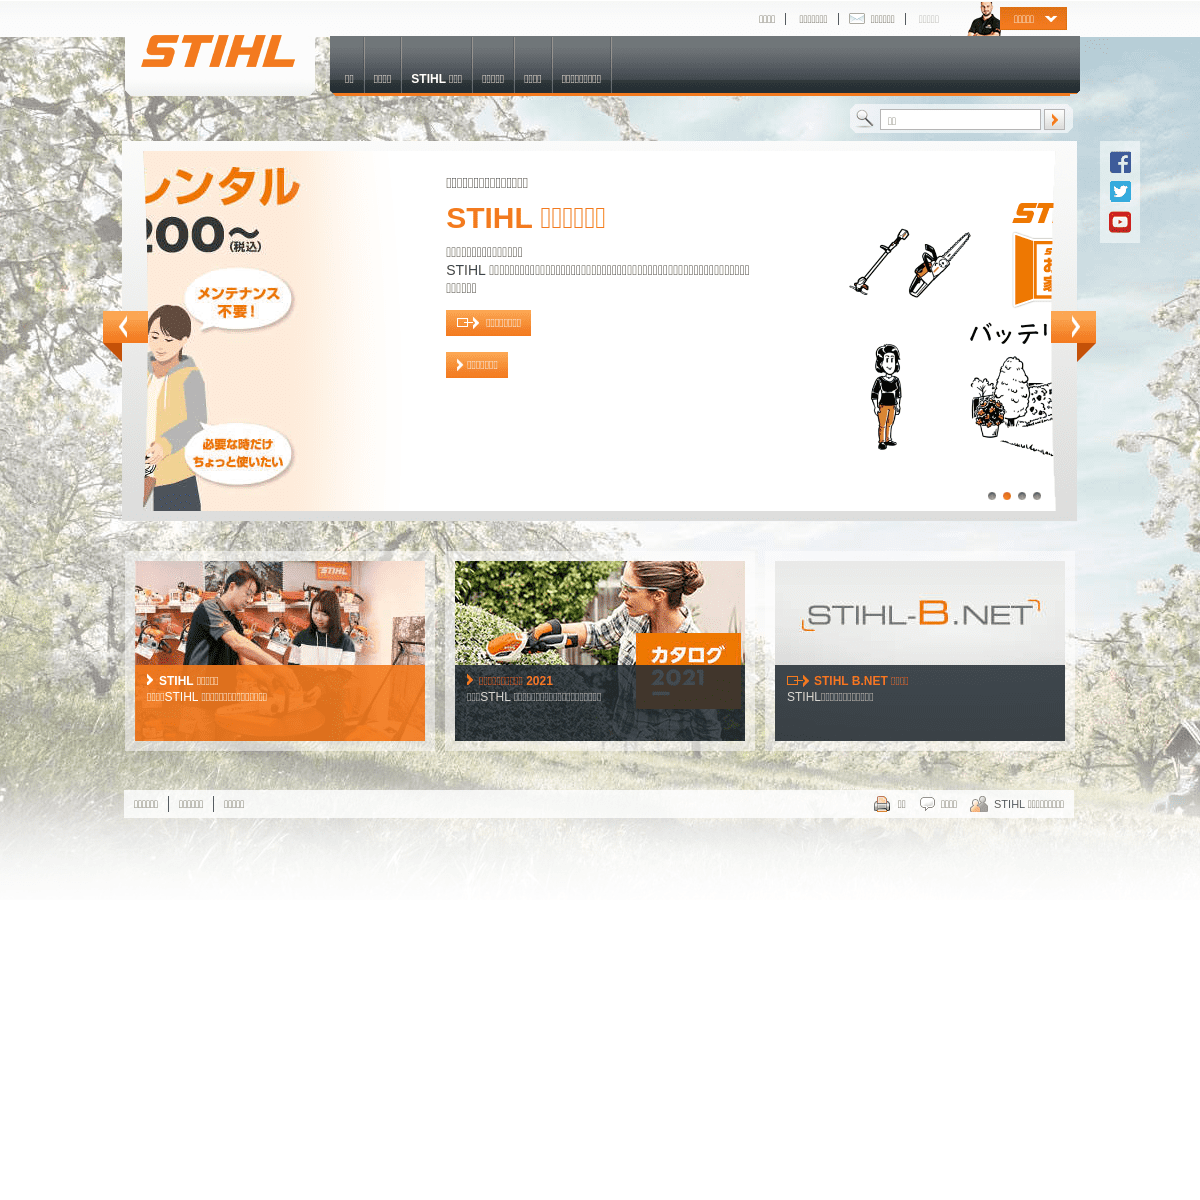 A complete backup of https://stihl.co.jp